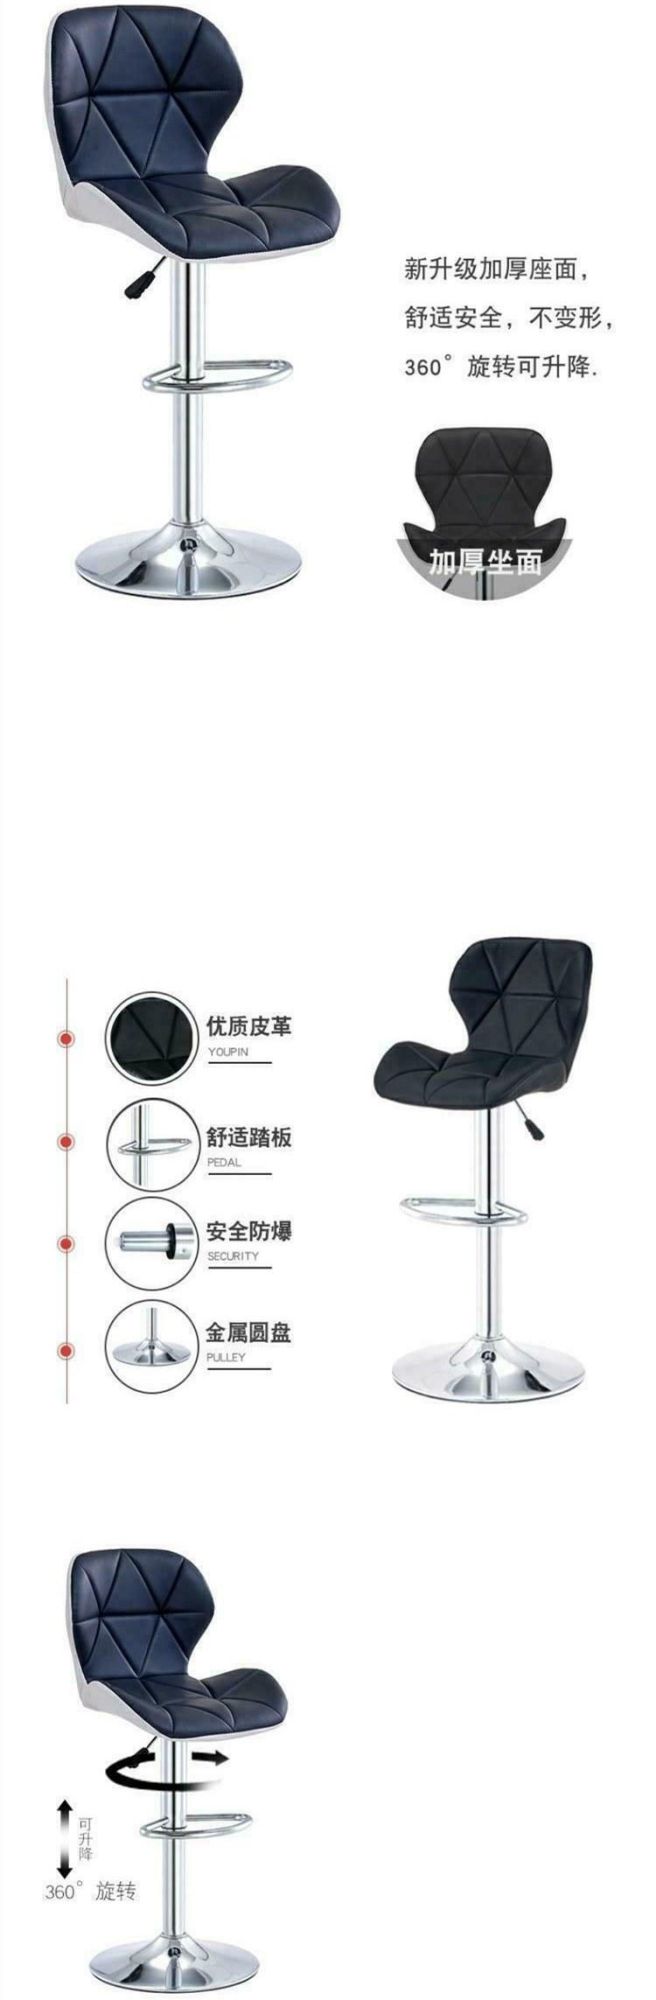 Dining Room Furniture Bar Stool Chair Nordic Restaurant Home Kitchen Island Modern PU Leather Dining Bar Chairs for Breakfast Bar